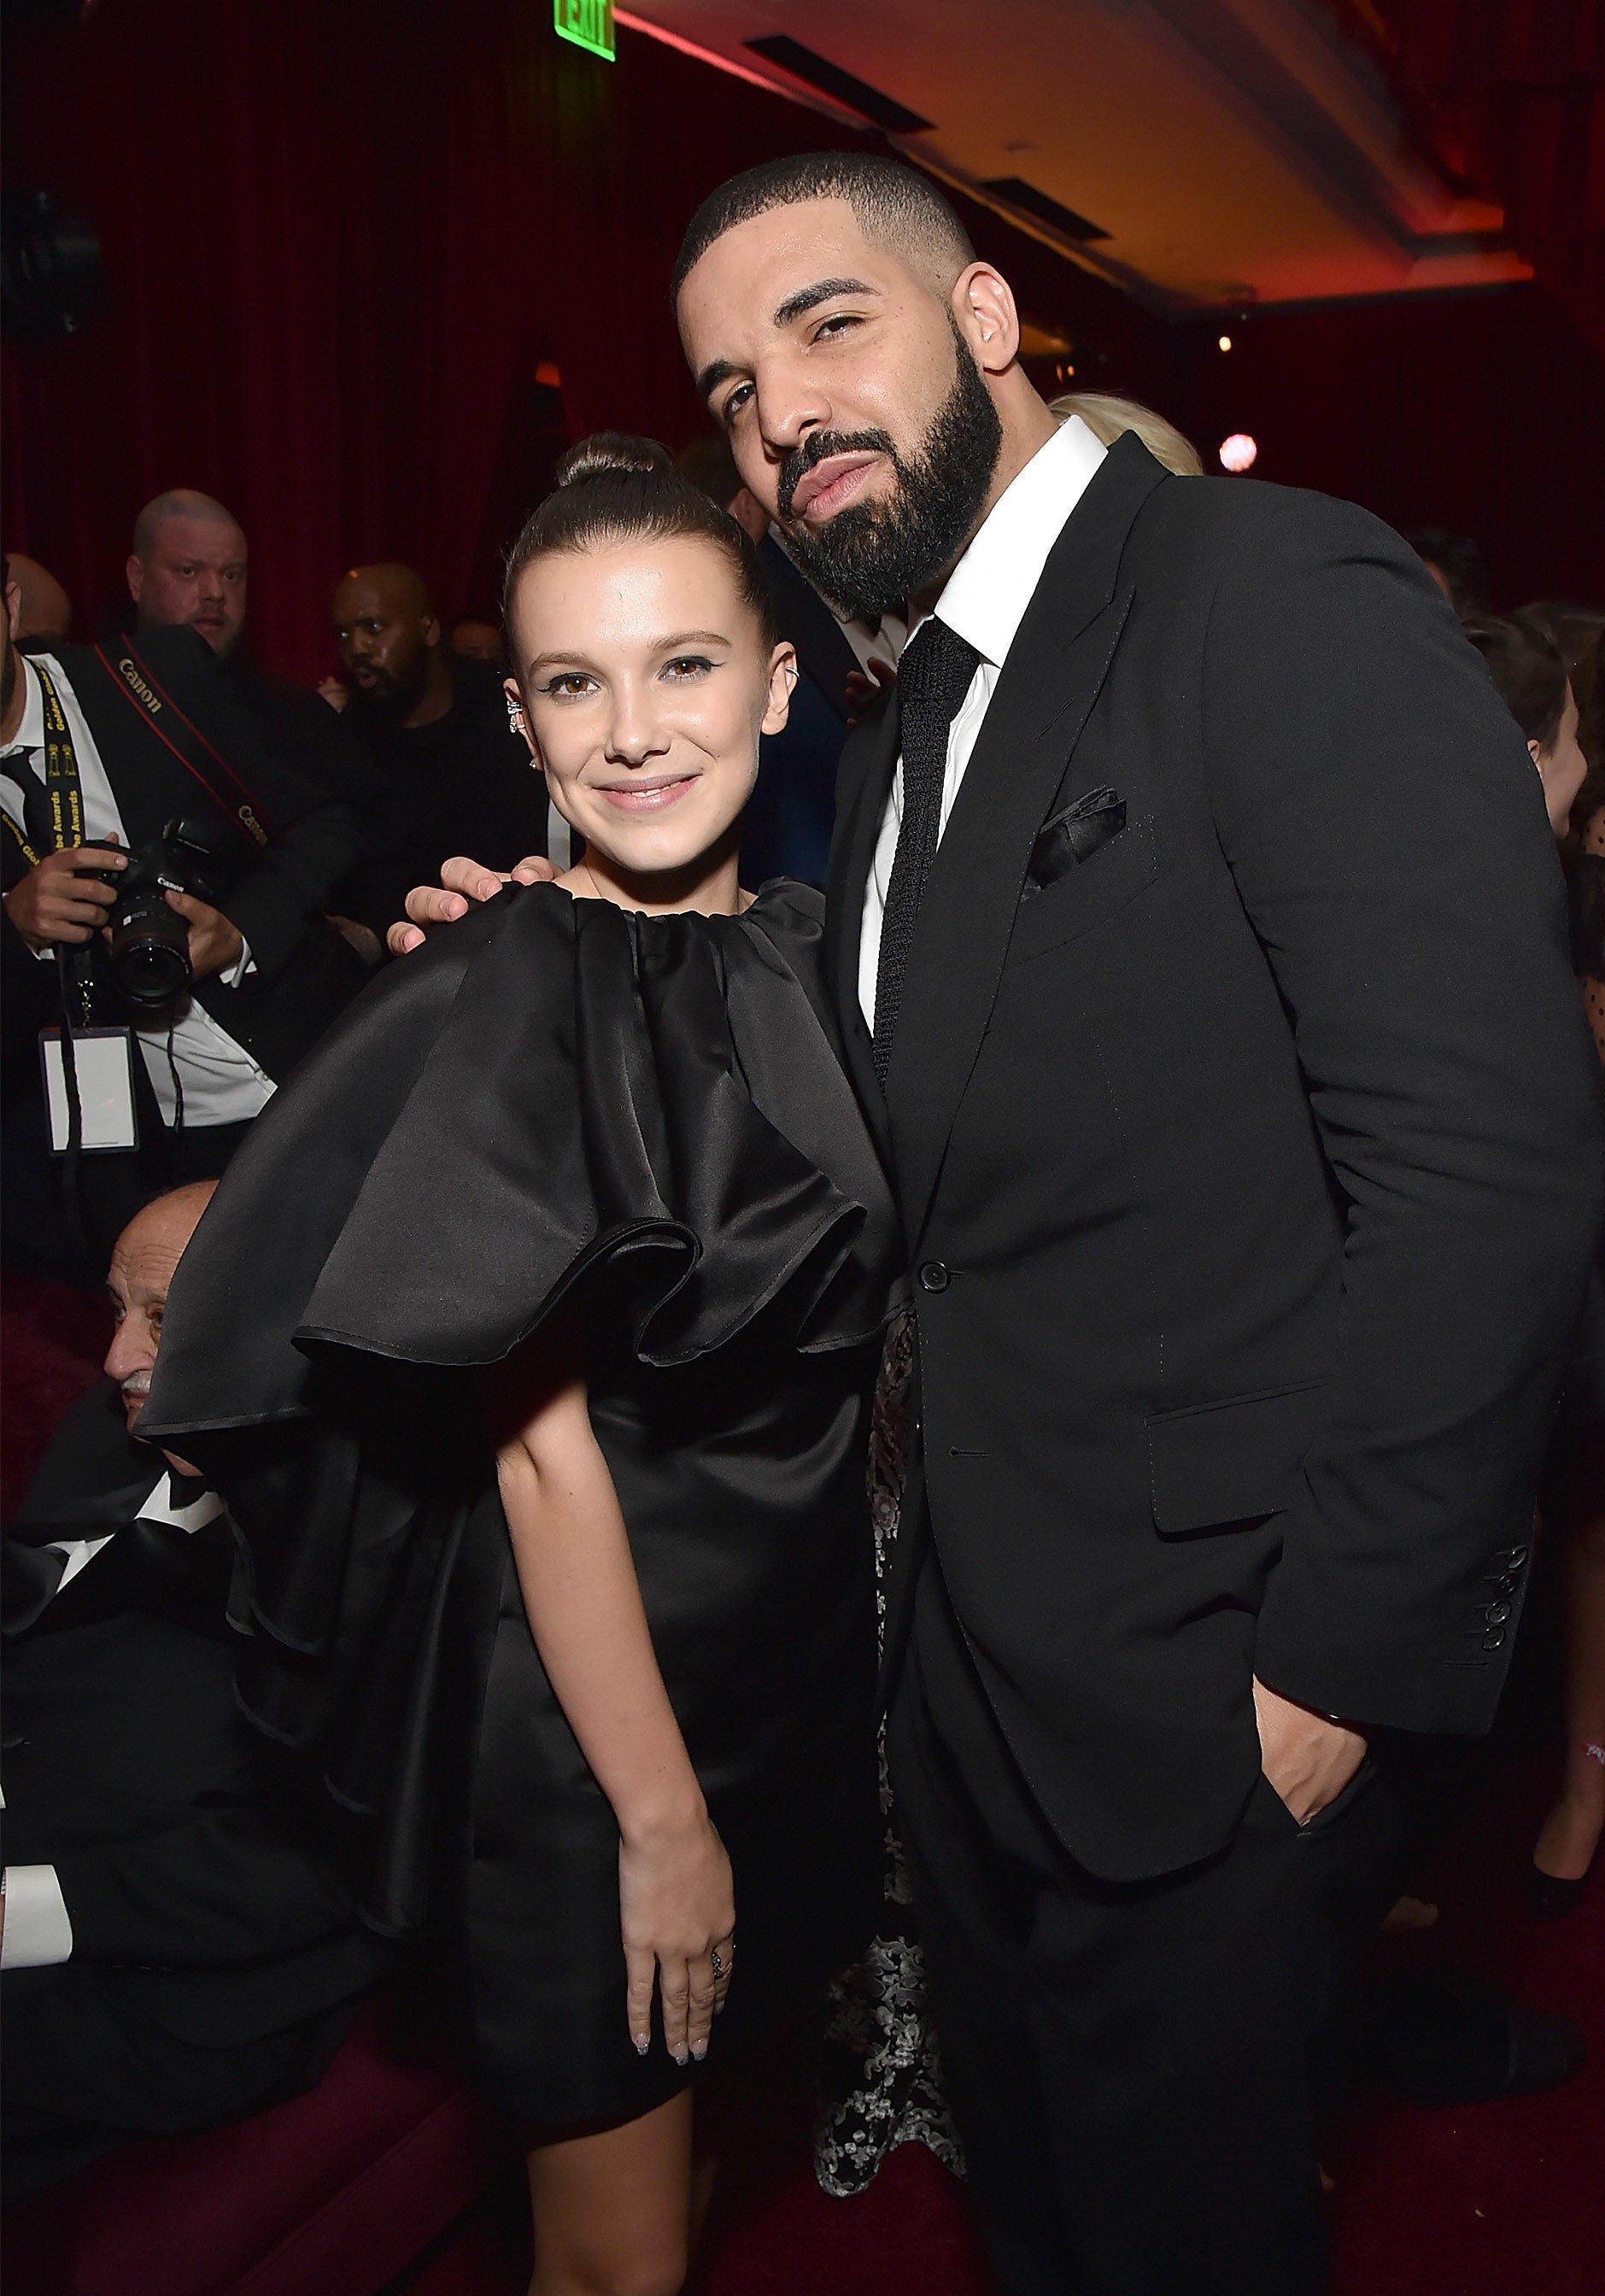 drake and millie together at an event